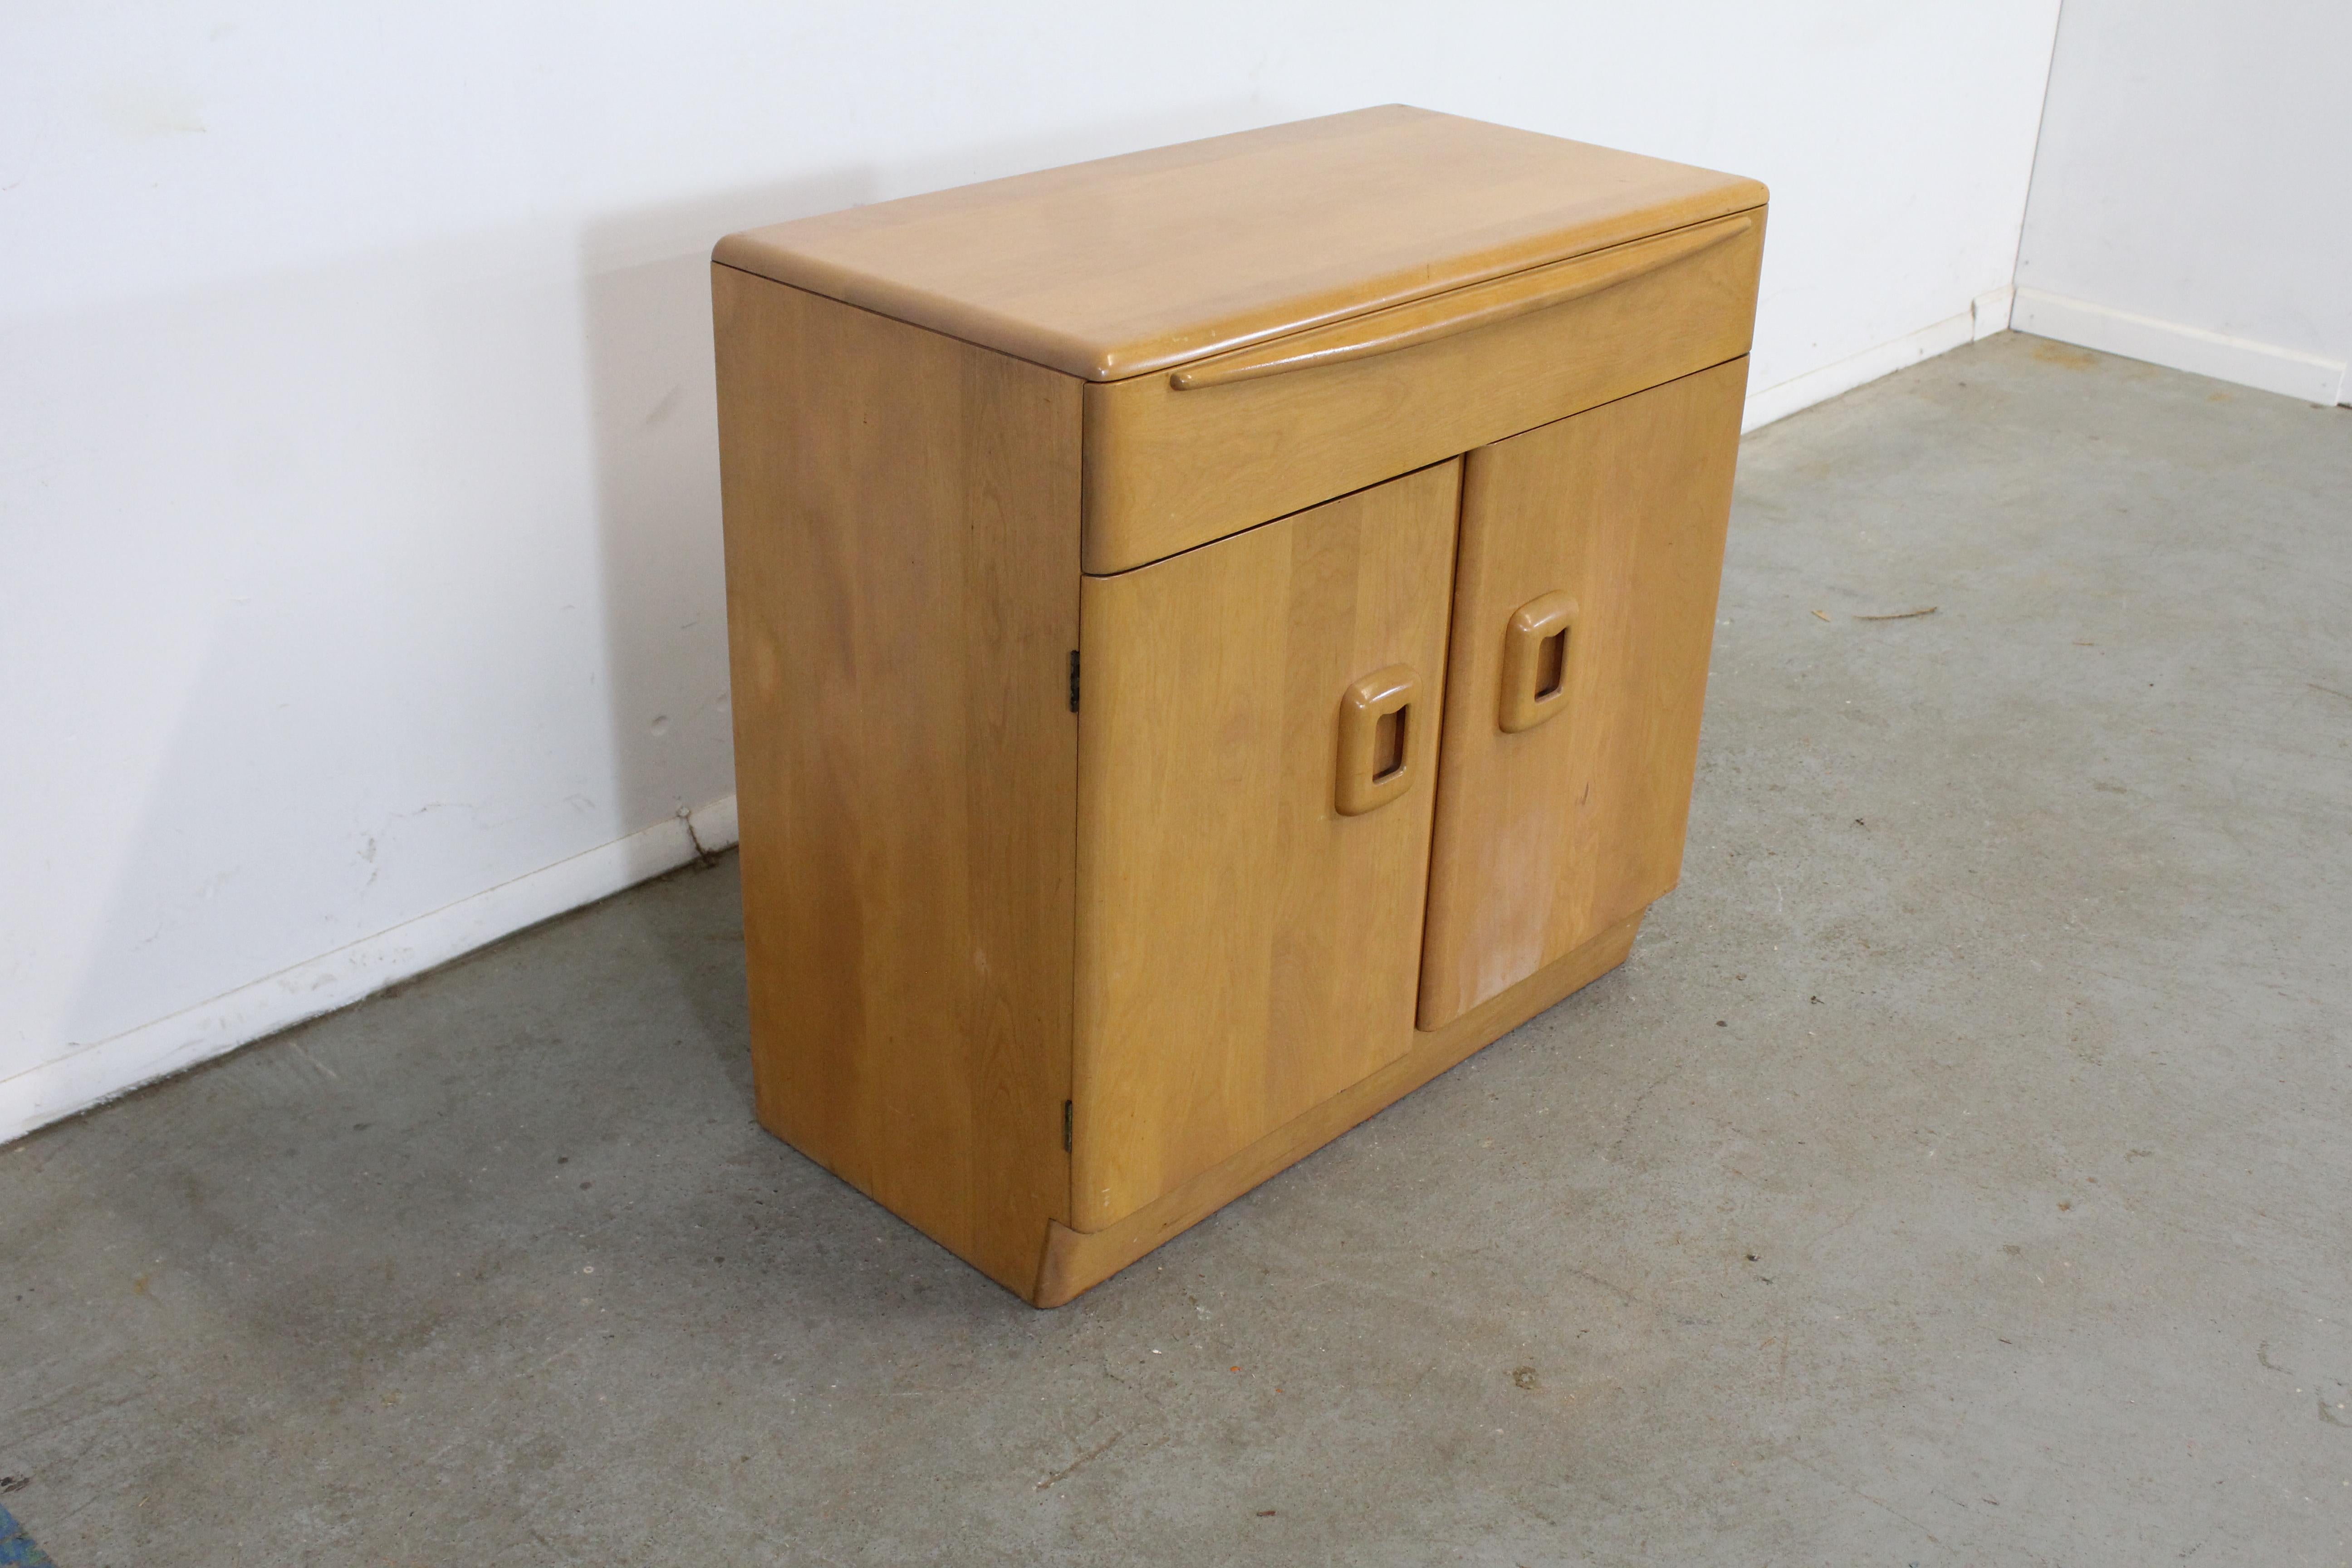 Mid-Century Modern Heywood Wakefield two door server

Offered is a Mid-Century Modern Heywood Wakefield two door server. It is in good condition and is structurally sound. There is some age wear and could be refinished due to some finish loss on